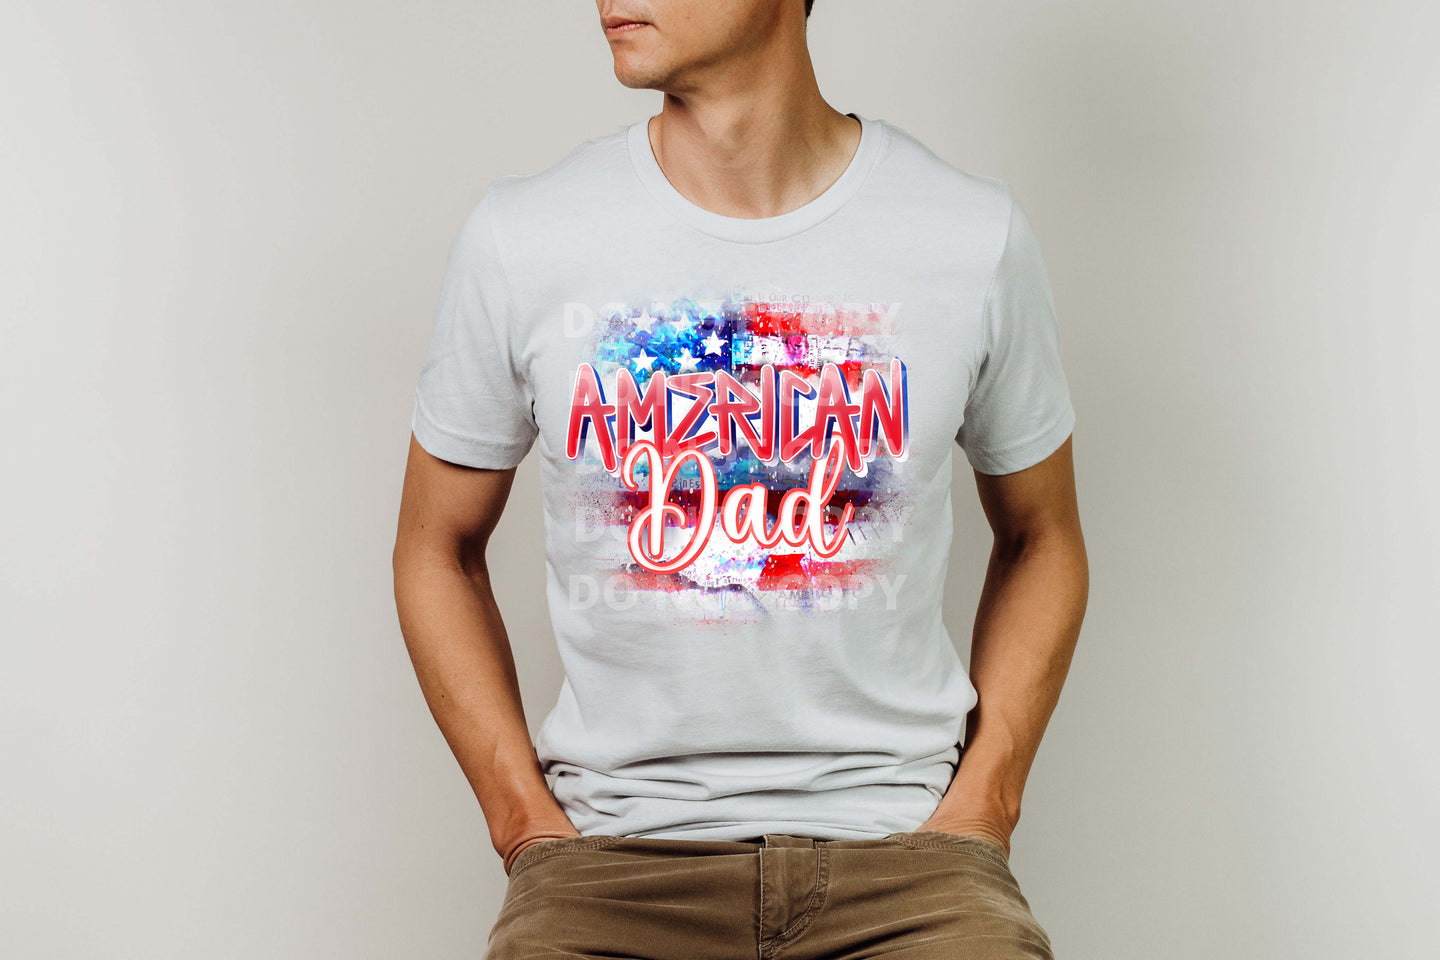 Man wearing a white shirt with a colorful “American Dad” design.